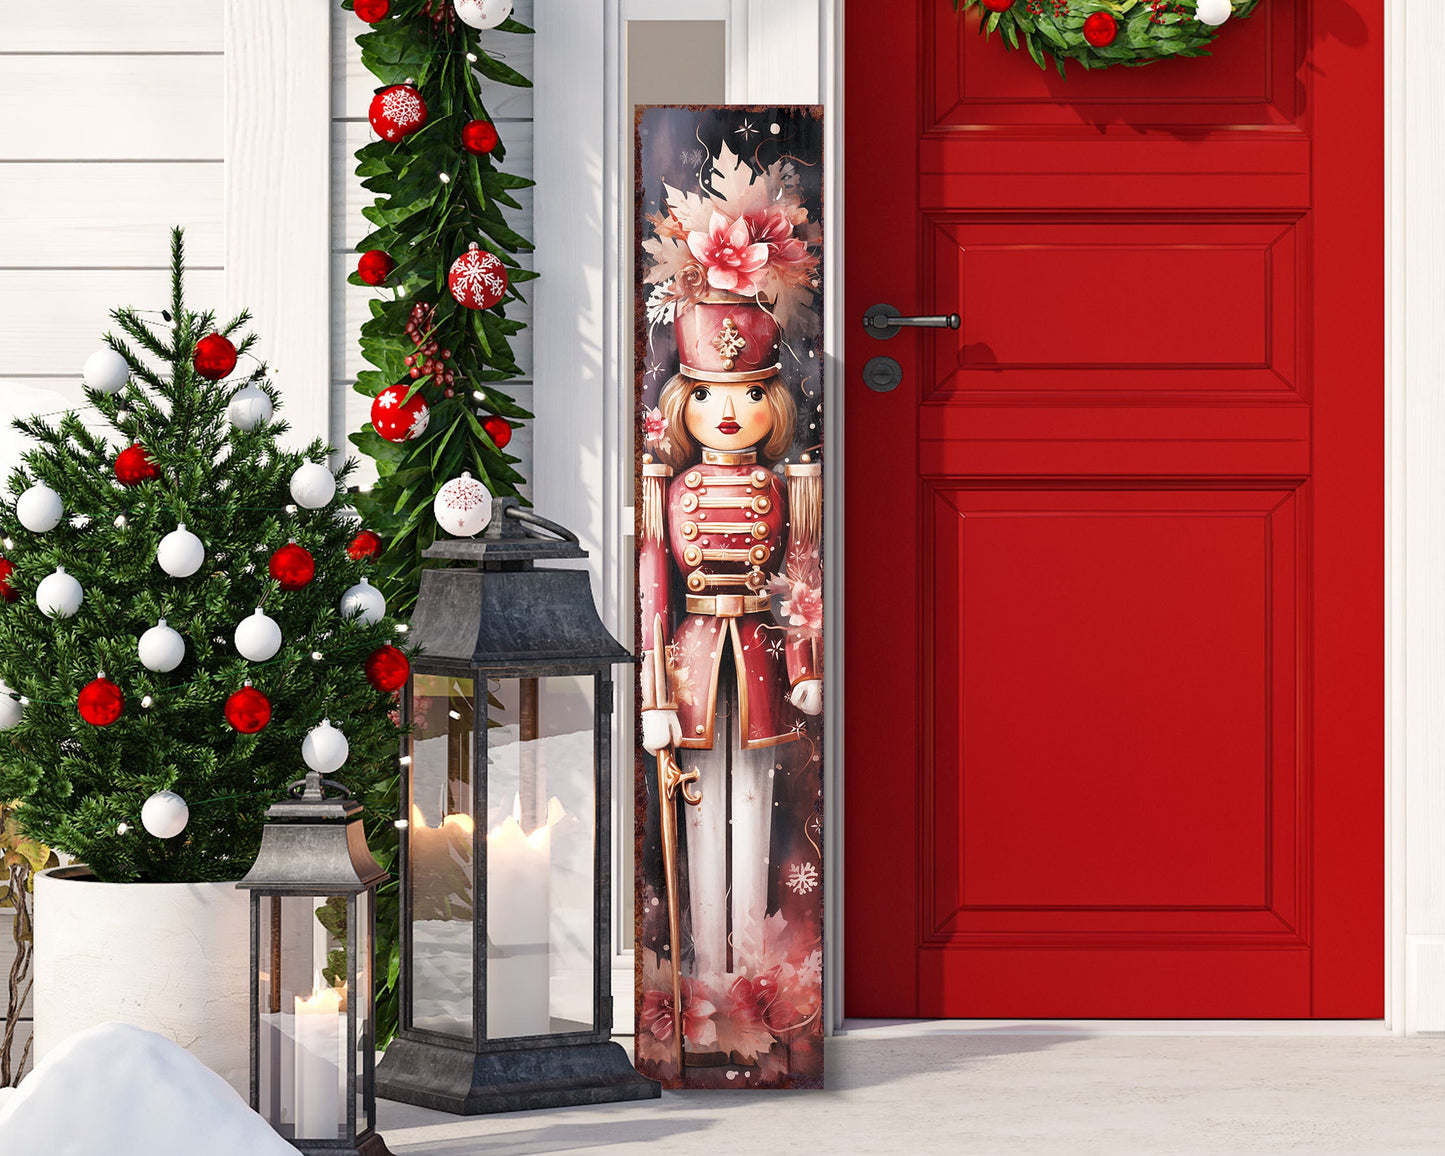 48in Girl Nutcracker Soldier Christmas Sign: Vintage Christmas Decoration for Front Porch - Modern Farmhouse Entryway Decor